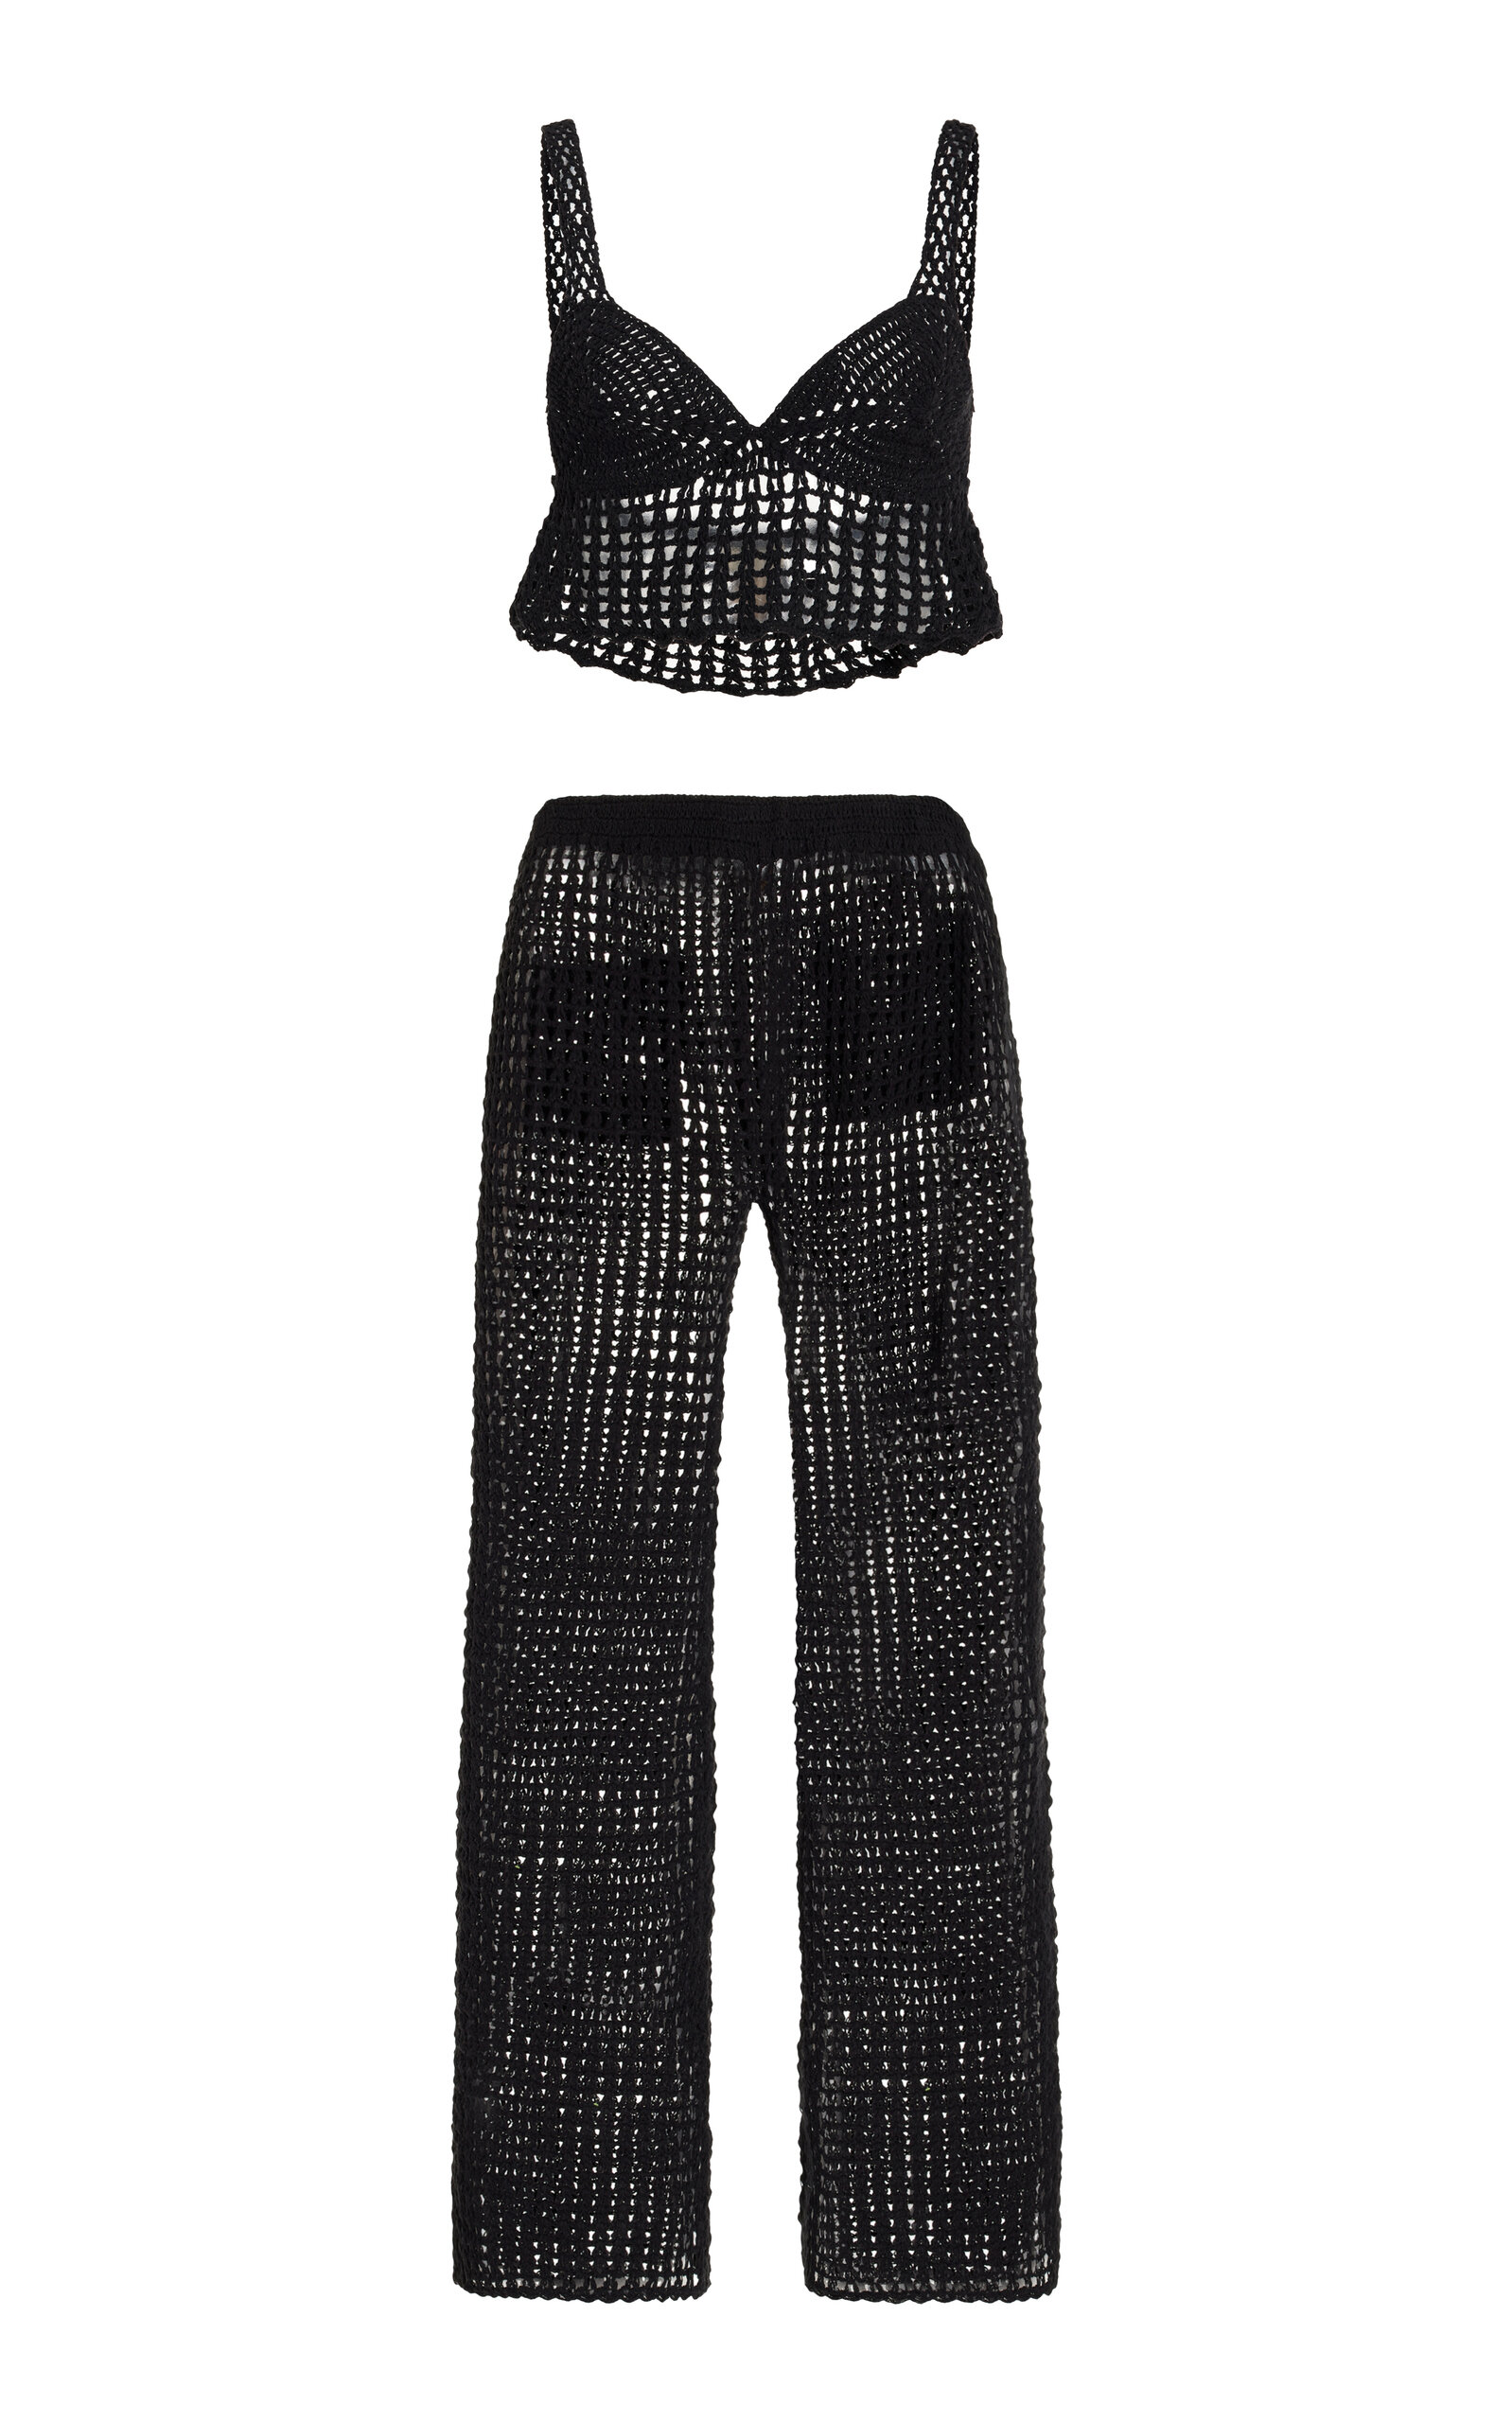 Poppi Crocheted Pant And Top Set